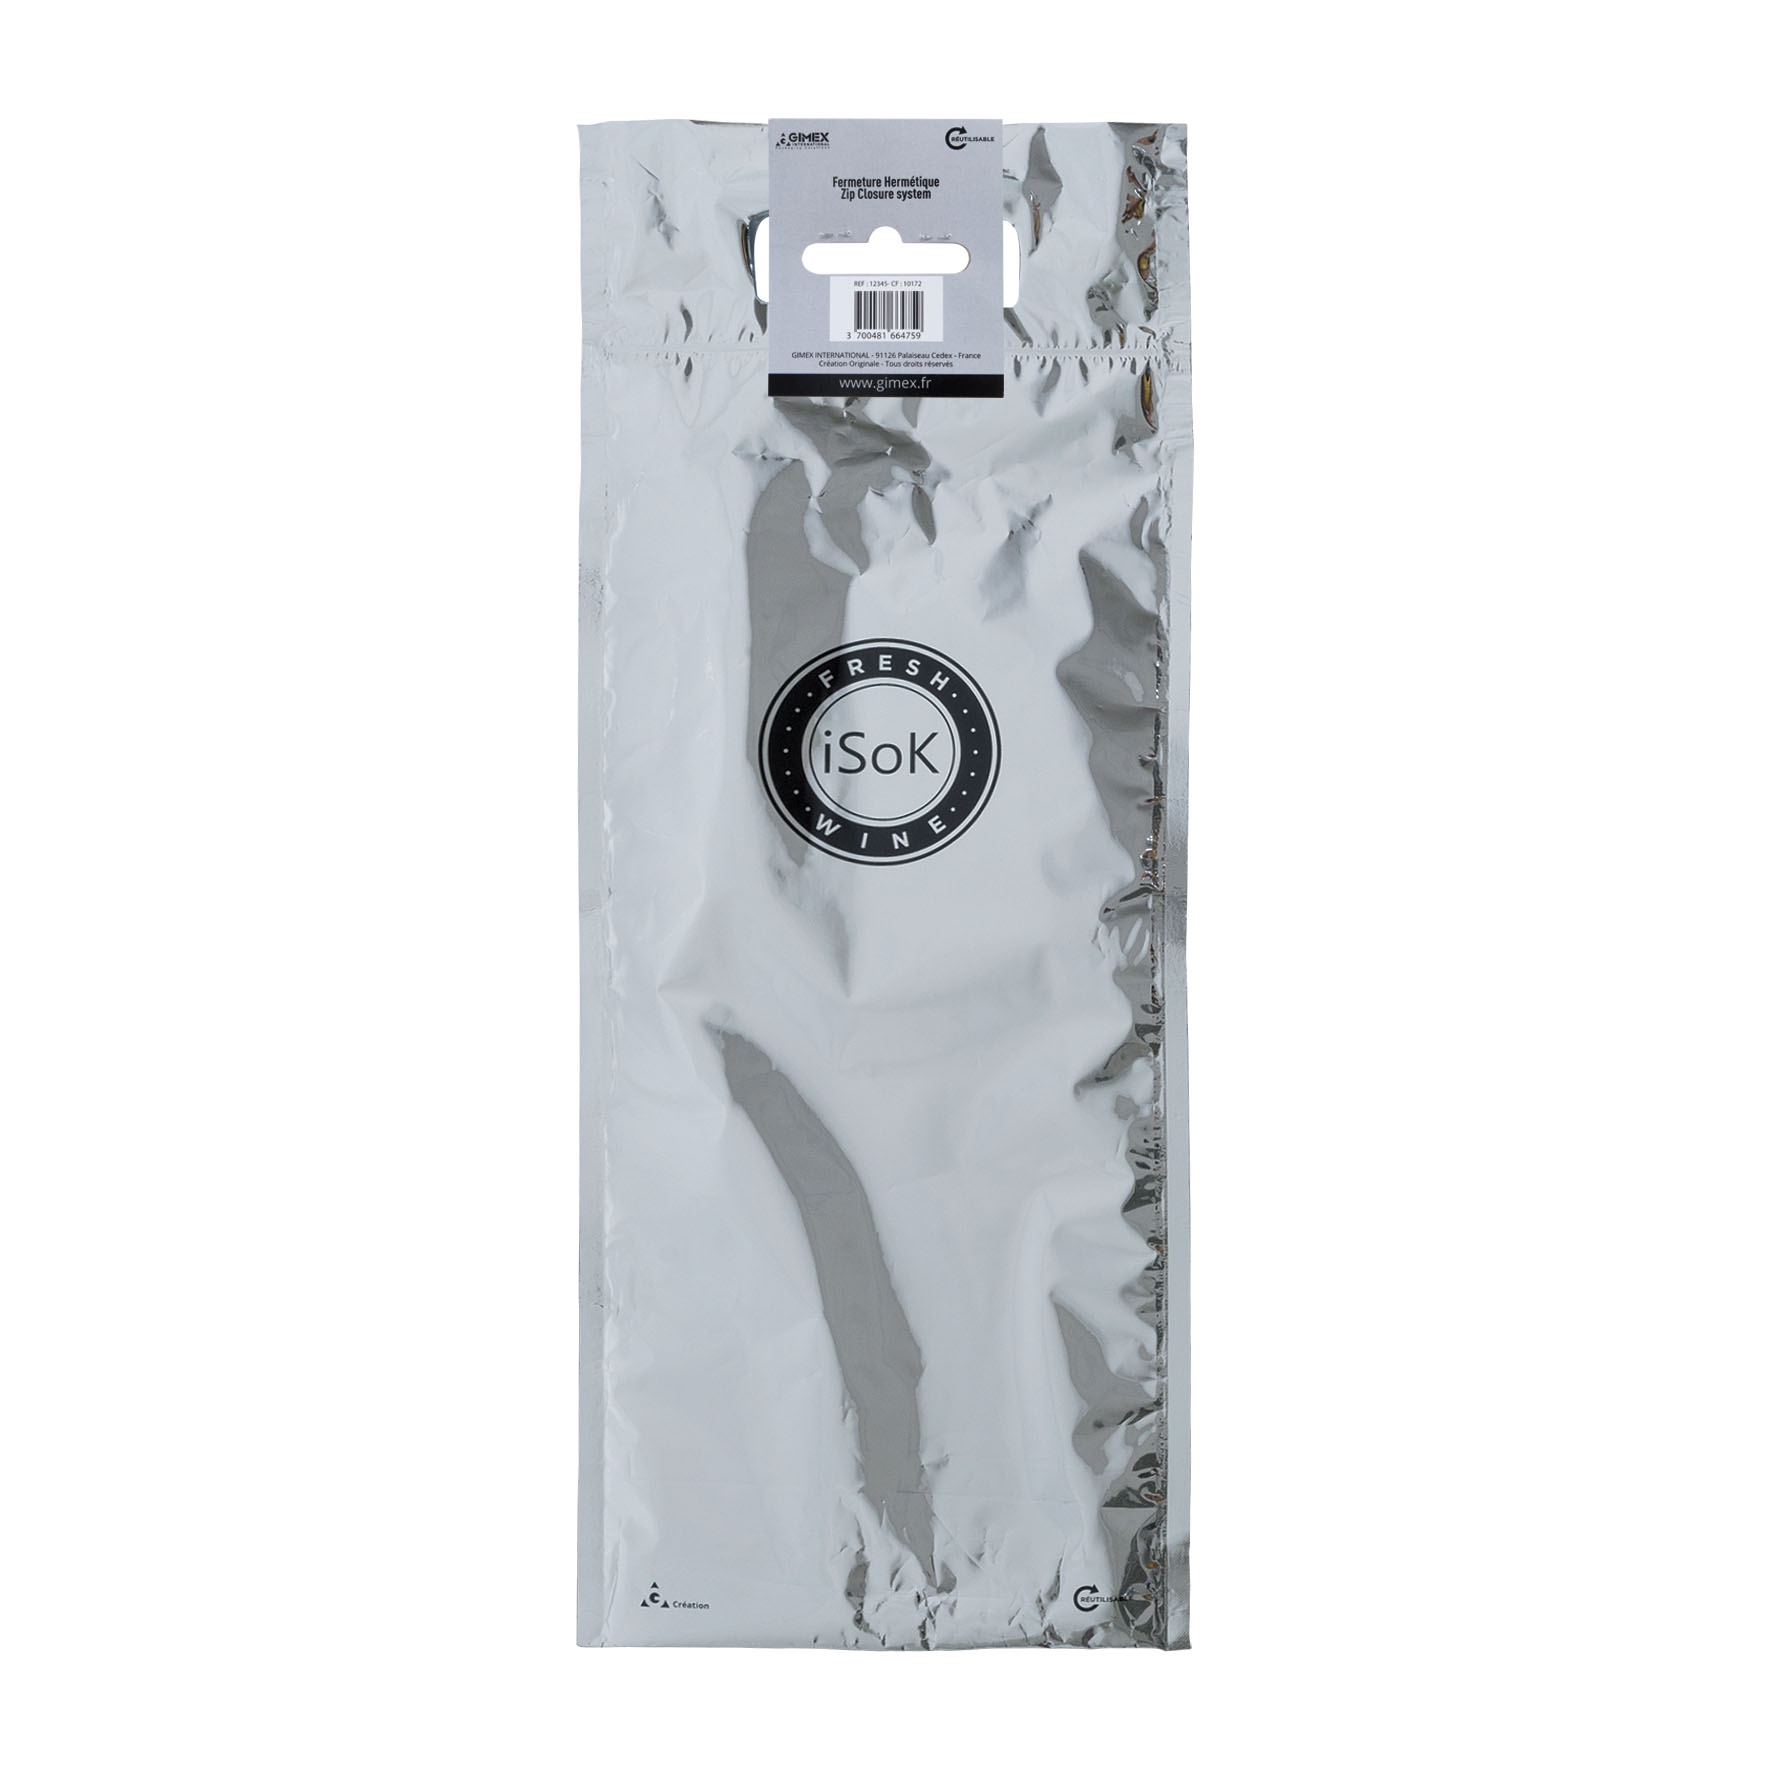 Objet promotionnel - Sac isotherme 1 Bouteille Isok®